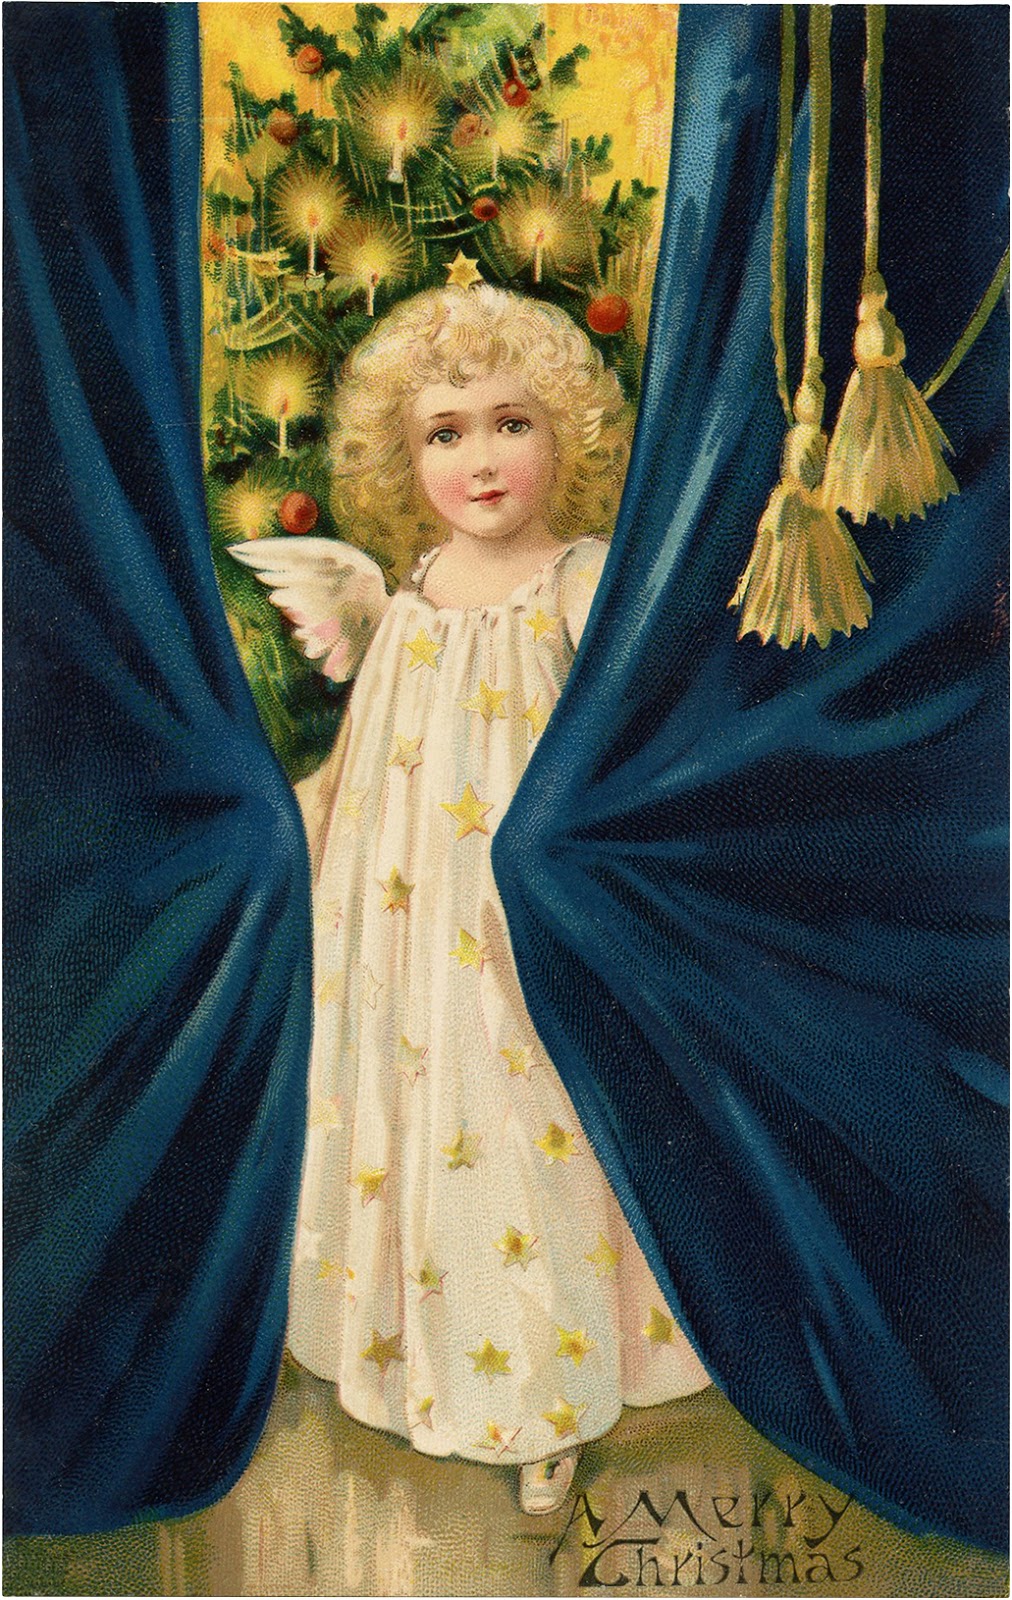 Antiques And Teacups Flock of Antique Christmas Angel Postcards for